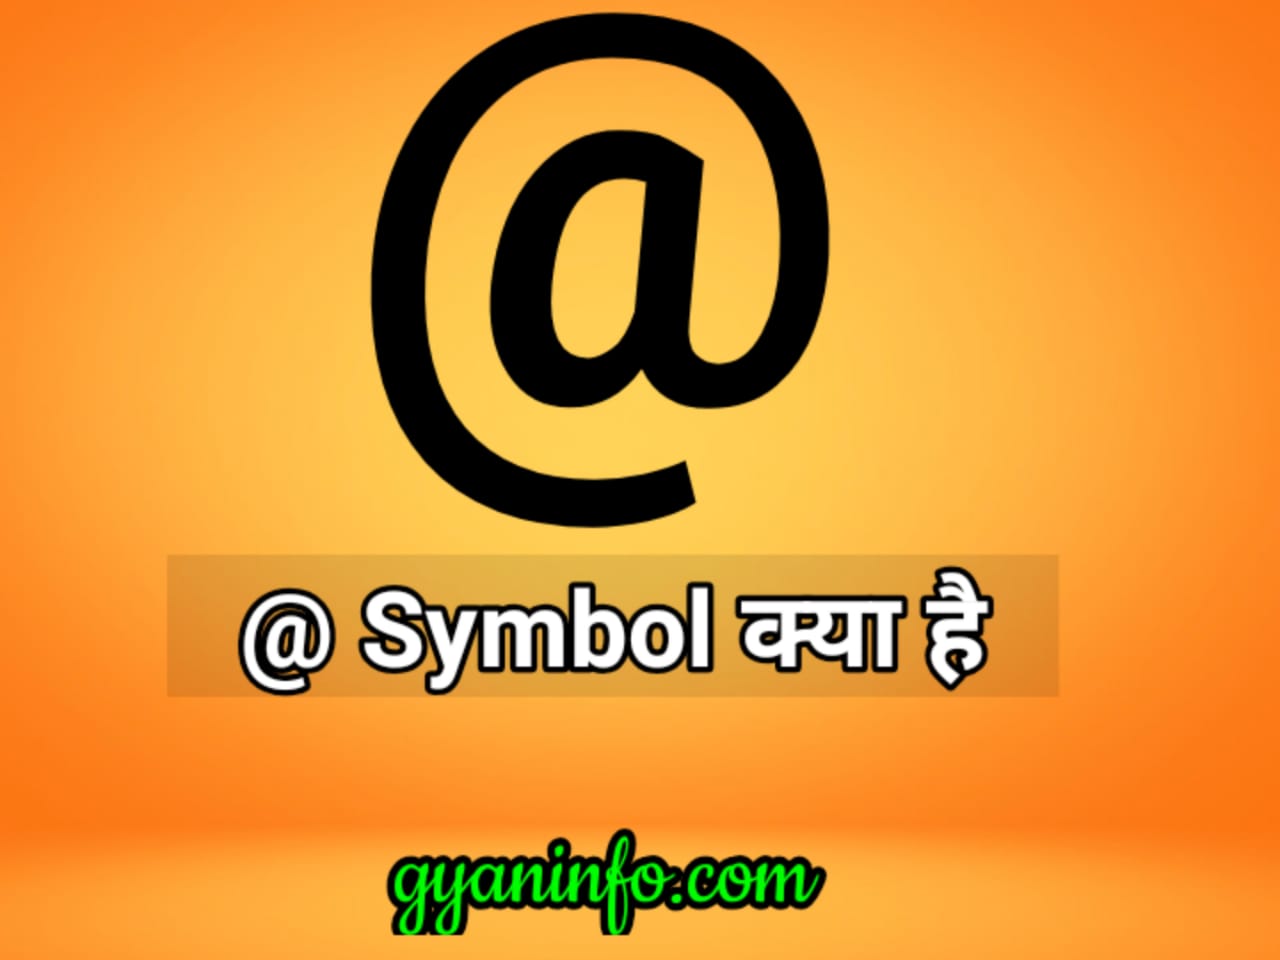 At The Rate (@) Symbol in Hindi With Full Information